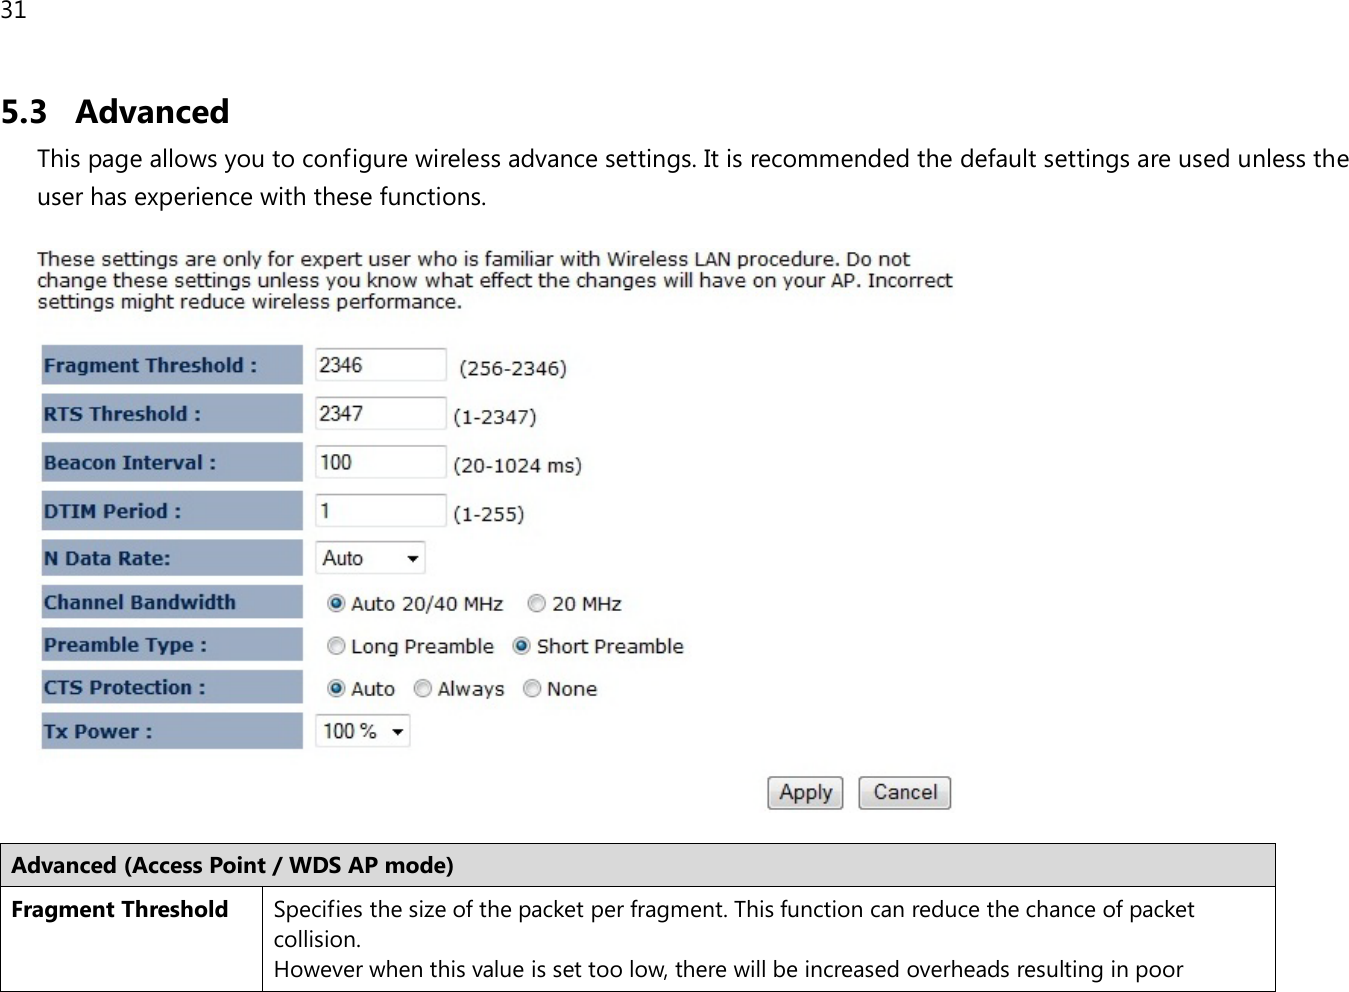 31  5.3 Advanced This page allows you to configure wireless advance settings. It is recommended the default settings are used unless the user has experience with these functions.    Advanced (Access Point / WDS AP mode) Fragment Threshold Specifies the size of the packet per fragment. This function can reduce the chance of packet collision. However when this value is set too low, there will be increased overheads resulting in poor 